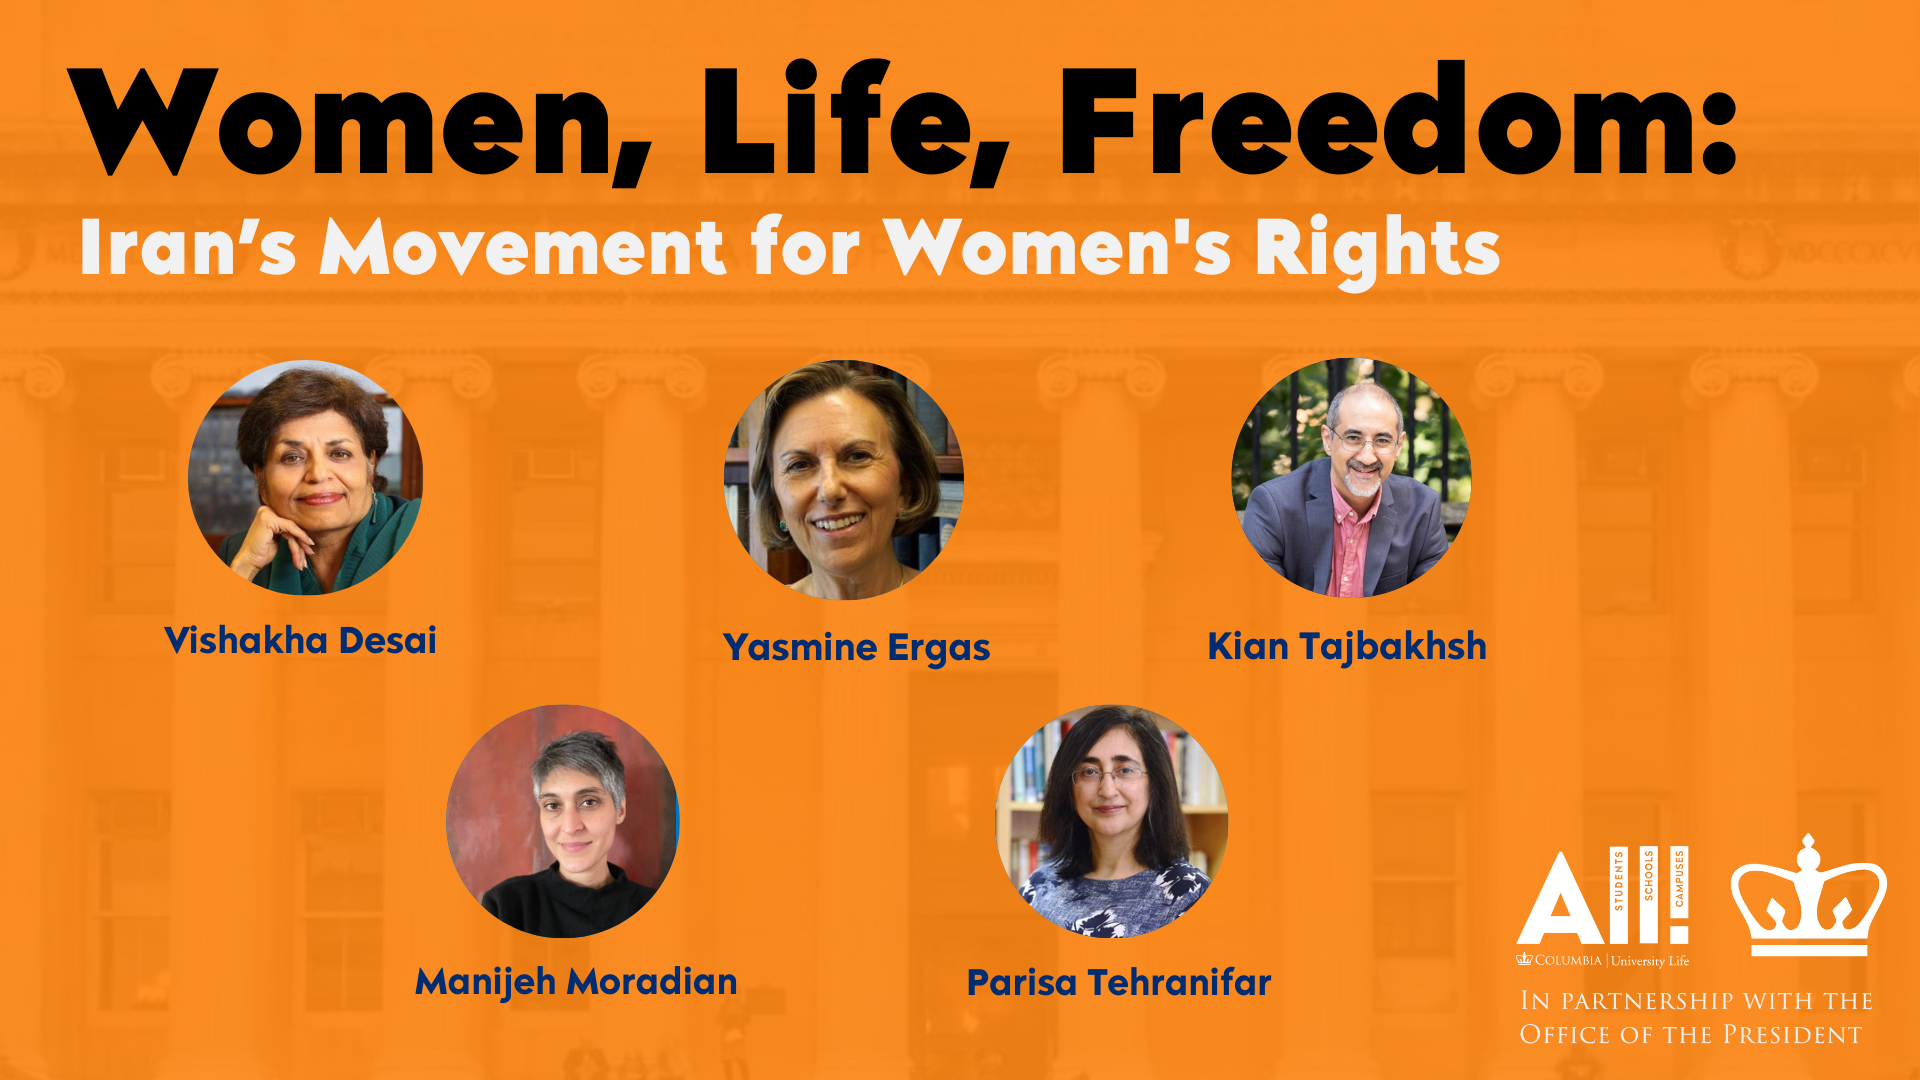 Women, Life, Freedom: Iran's Movement for Women's Rights